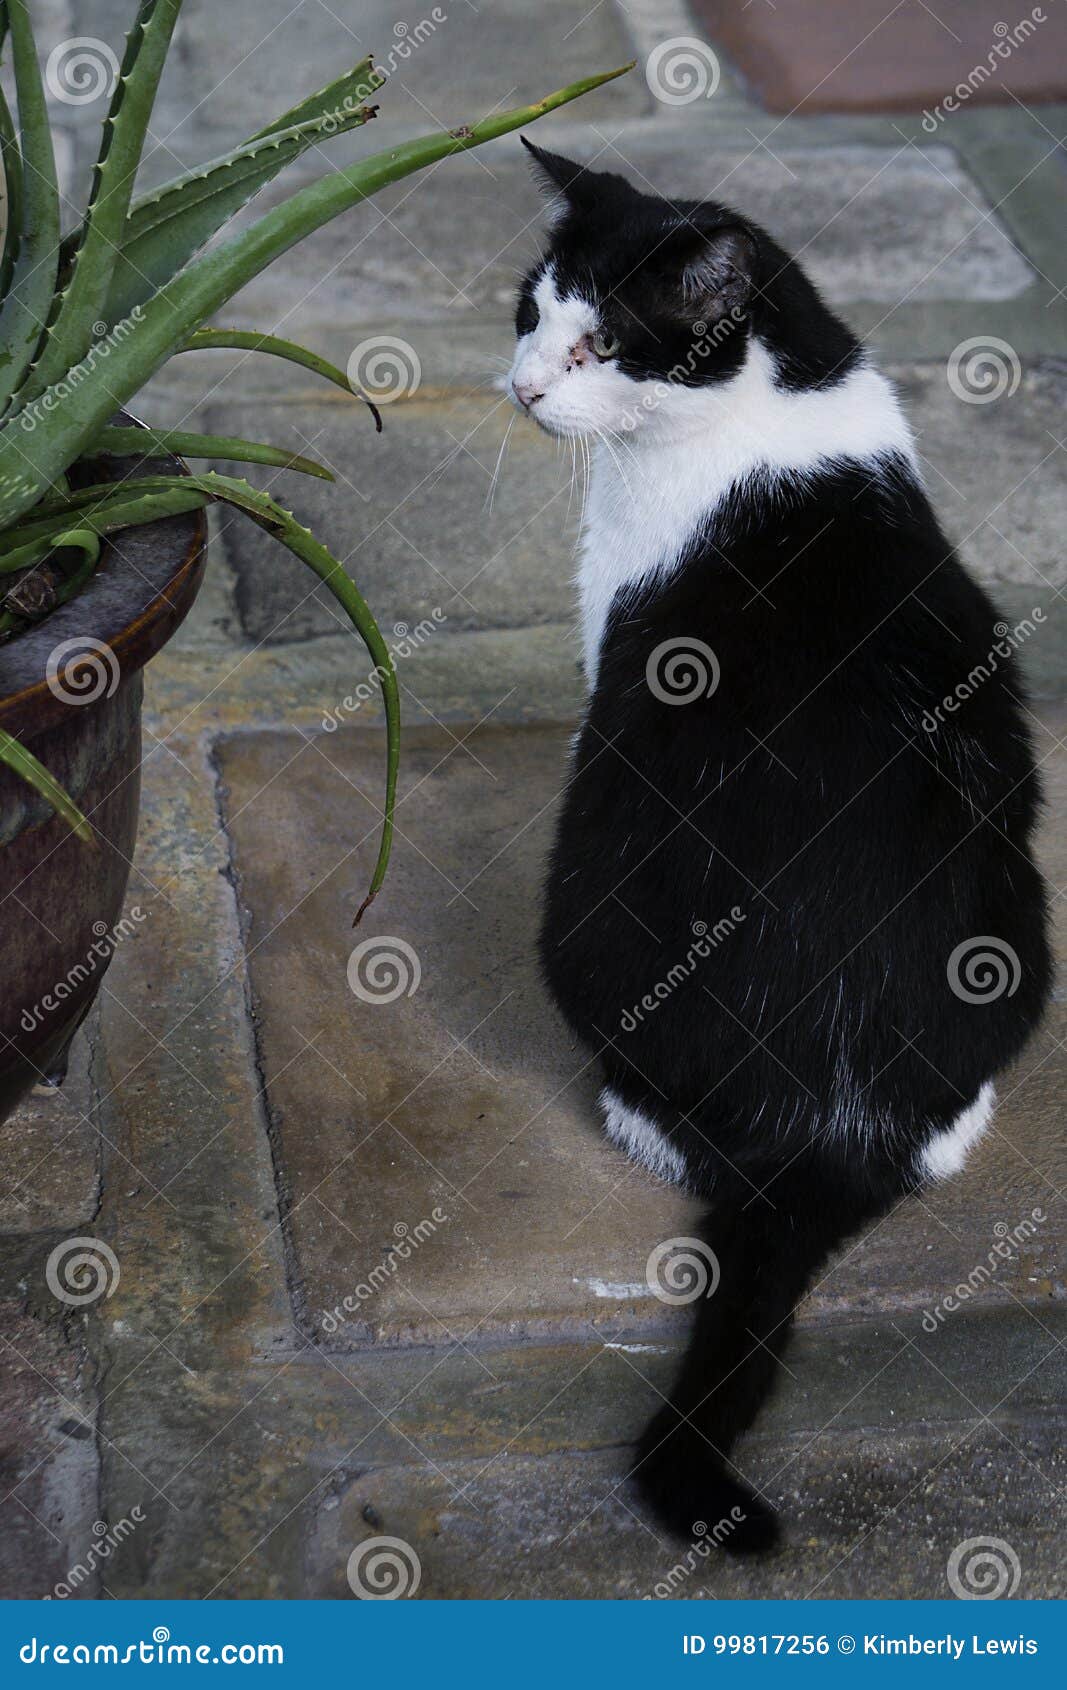 a black and white cat, one of the many at the six toe cat descendants at the ernest hemingway home in key west, florida.